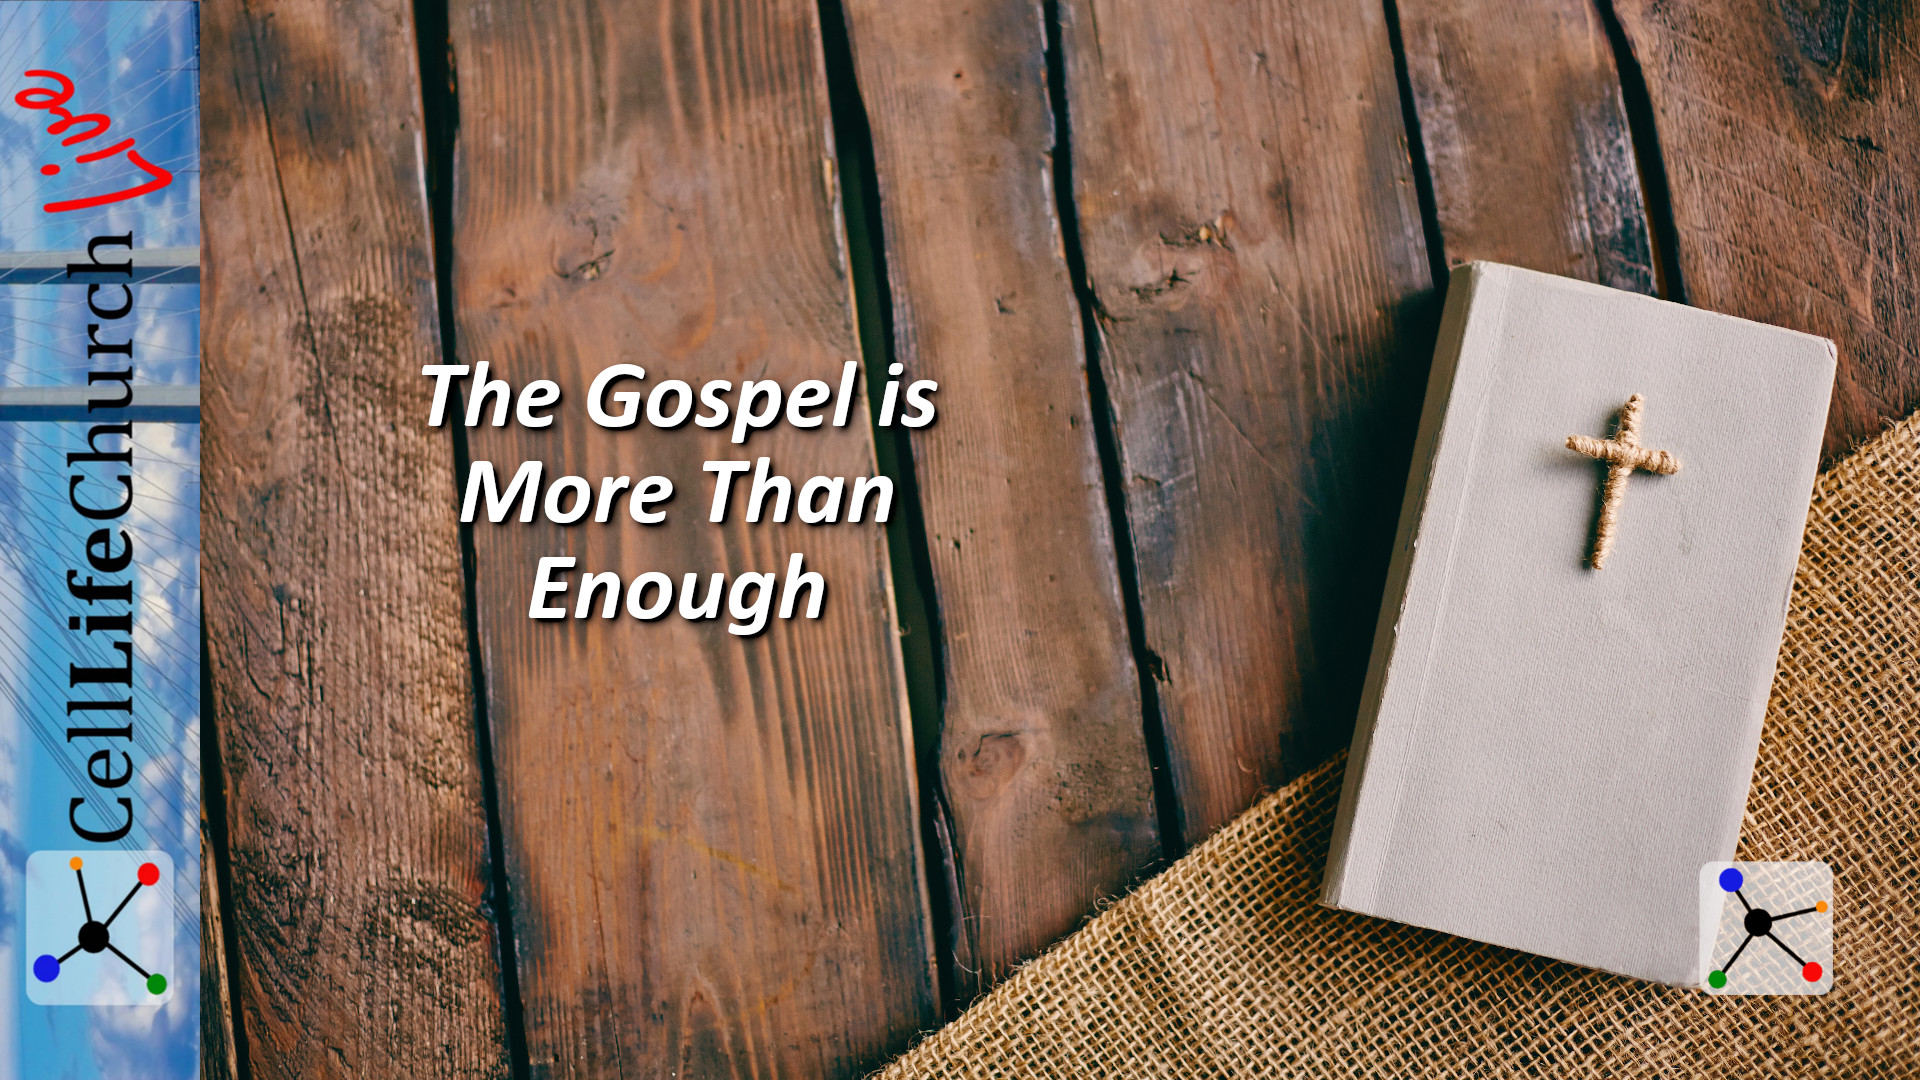 The Gospel is More Than Enough